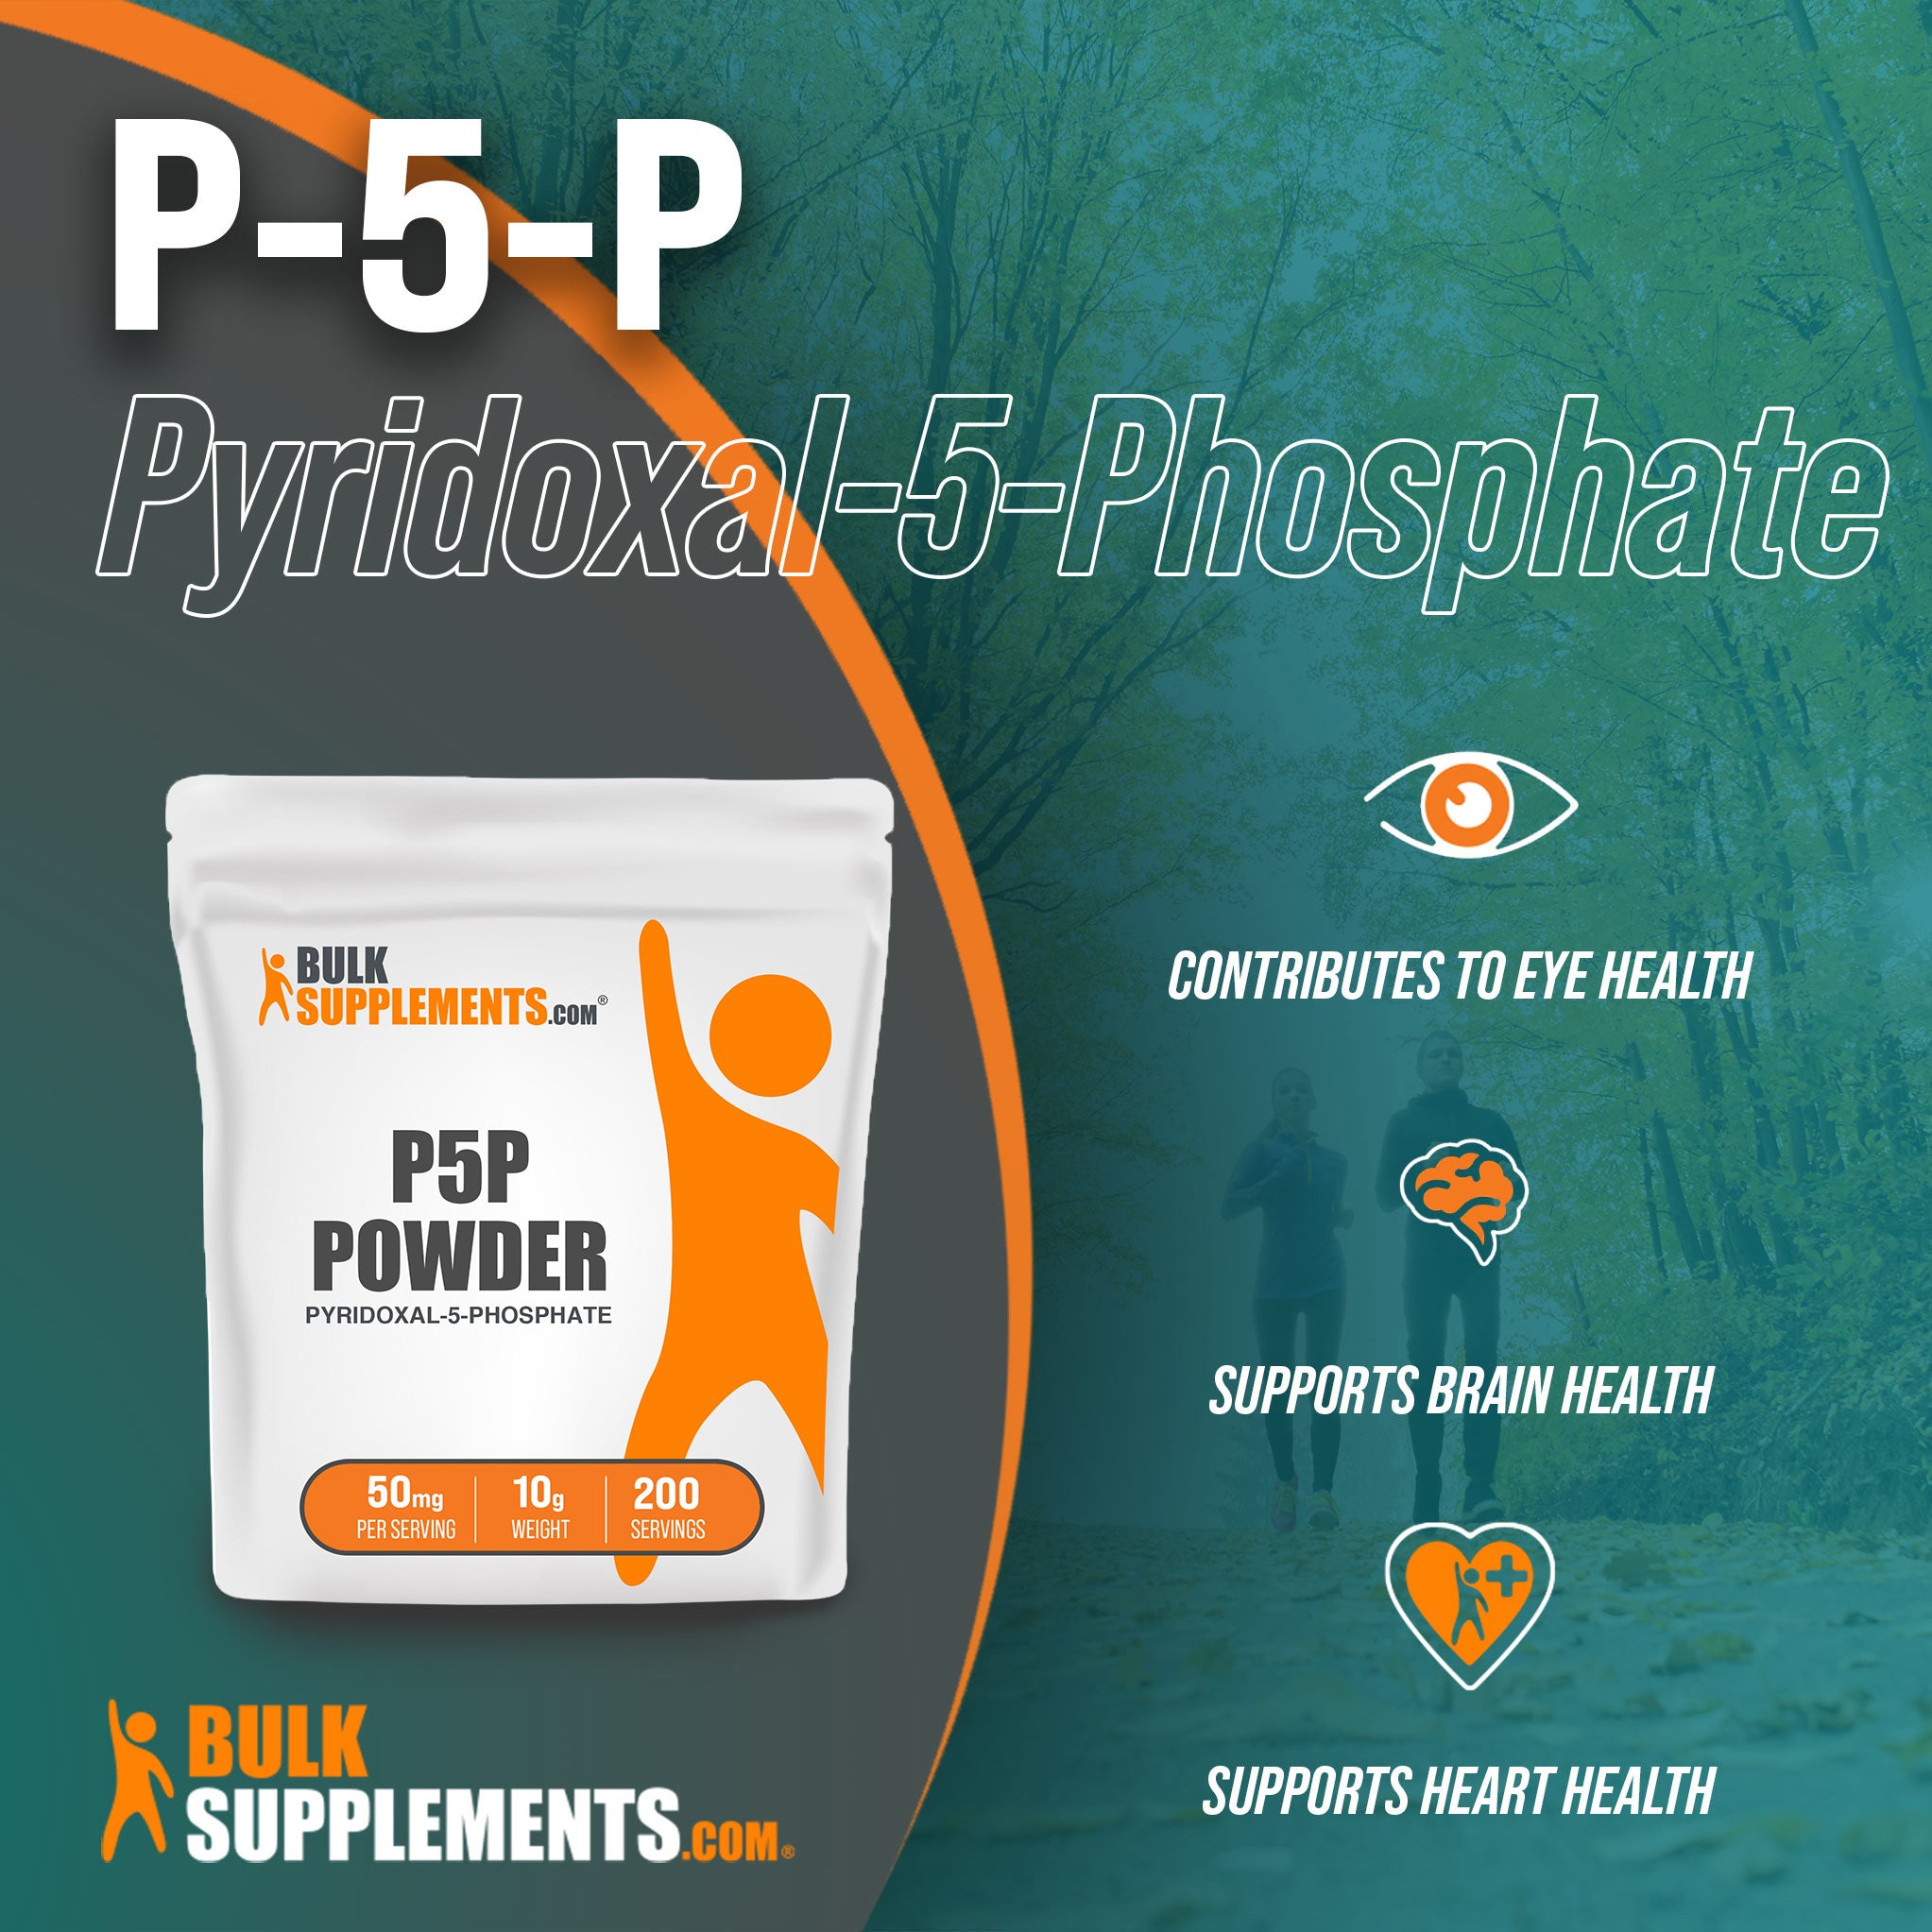 Benefits of P5P Pyridoxal-5-Phosphate: contributes to eye health, supports brain health, supports heart health